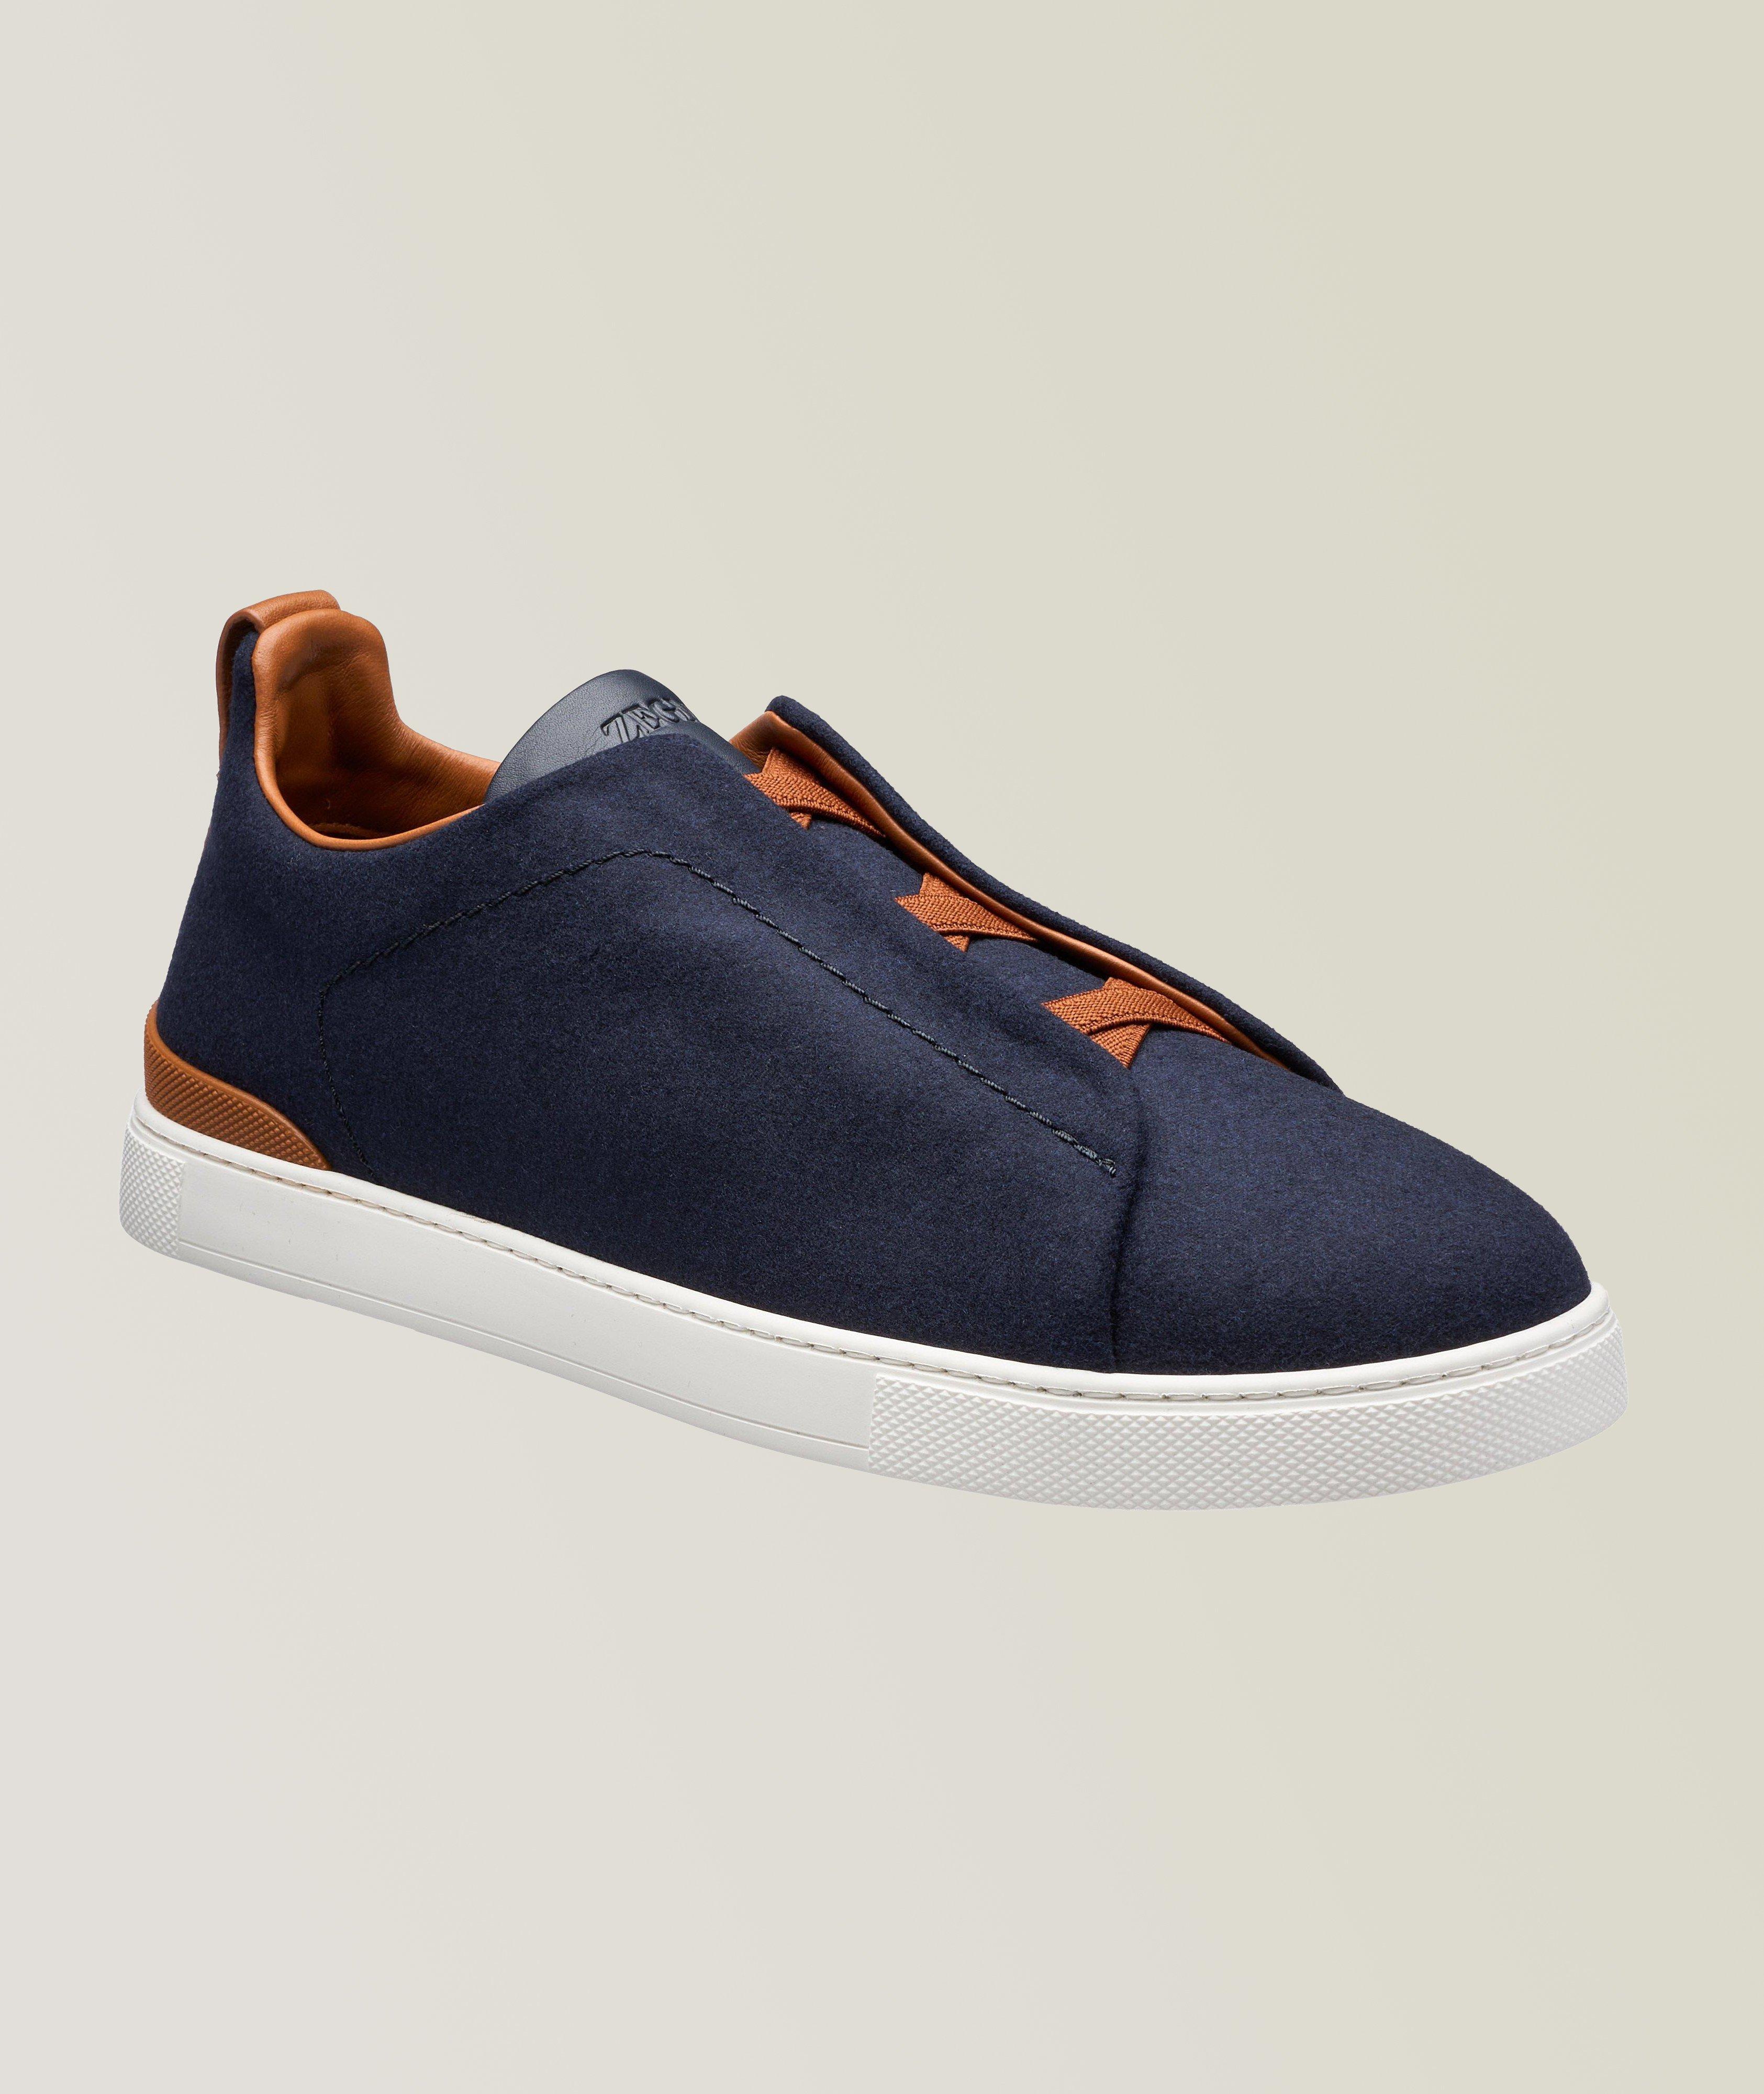 Triple Stitch Canvas Slip-On Sneakers image 0